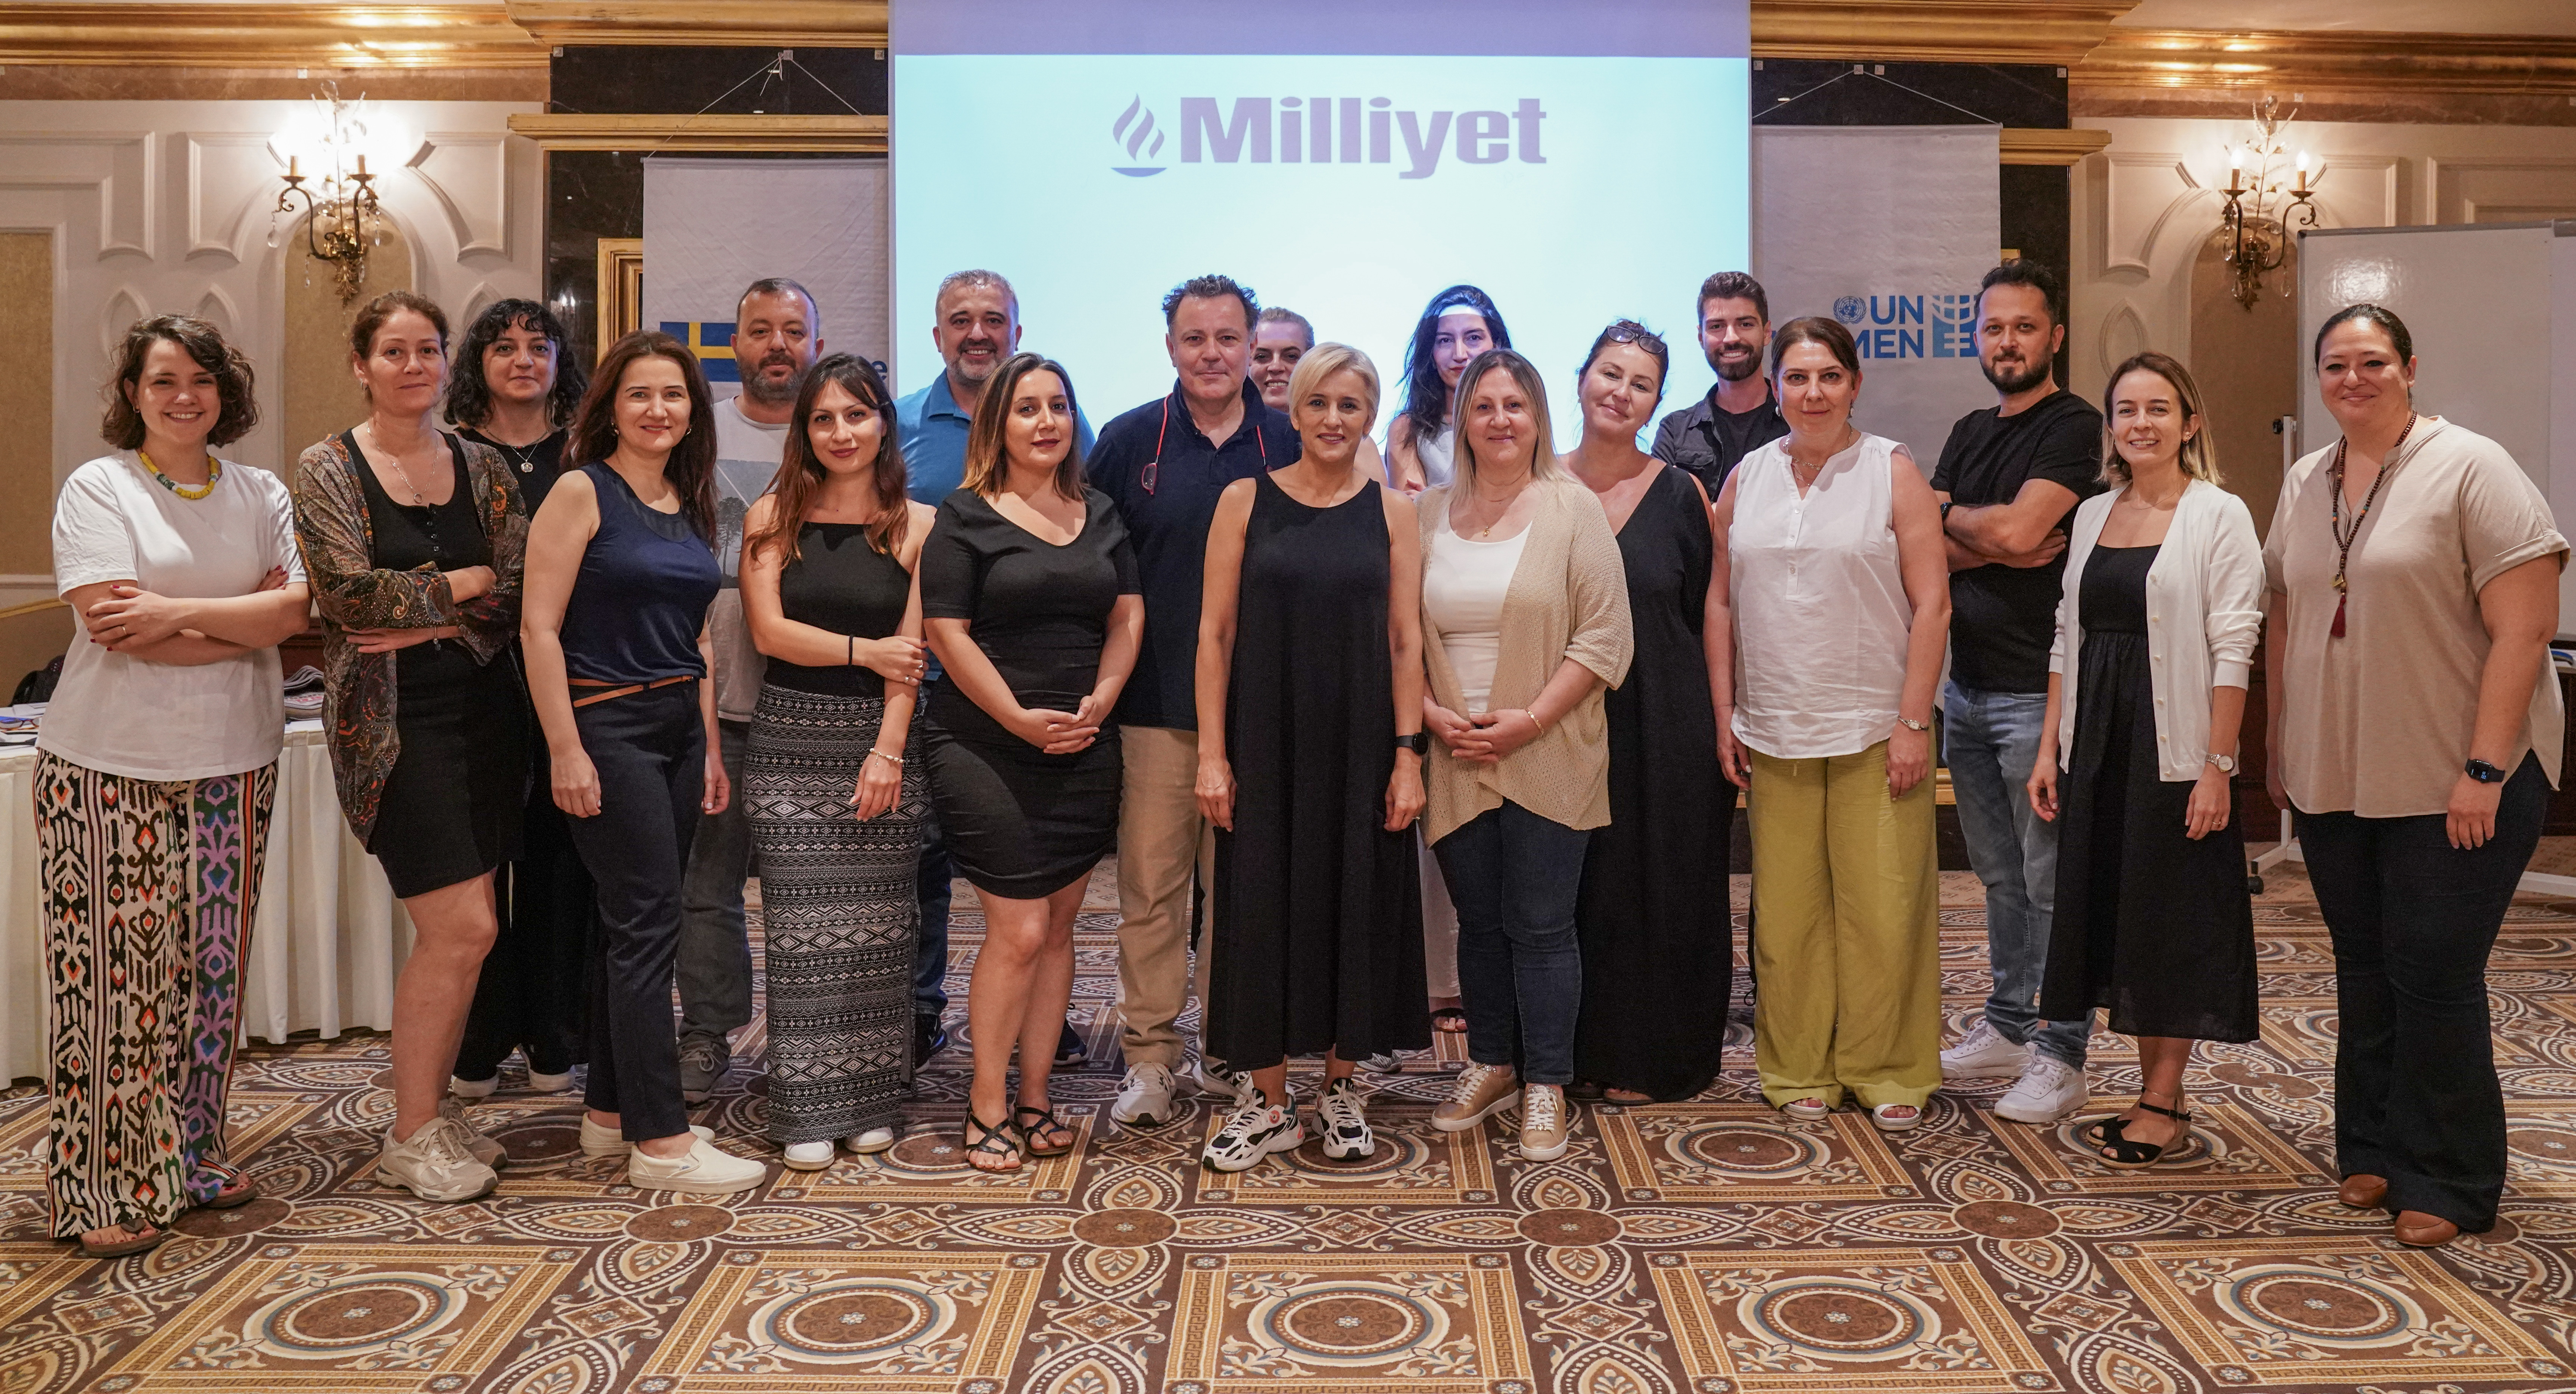 UN Women holds Gender Responsive Media Workshop Evaluation and Experience Sharing Meeting with Milliyet Newspaper. Photo: Milliyet Newspaper / Cemal Yurttaş